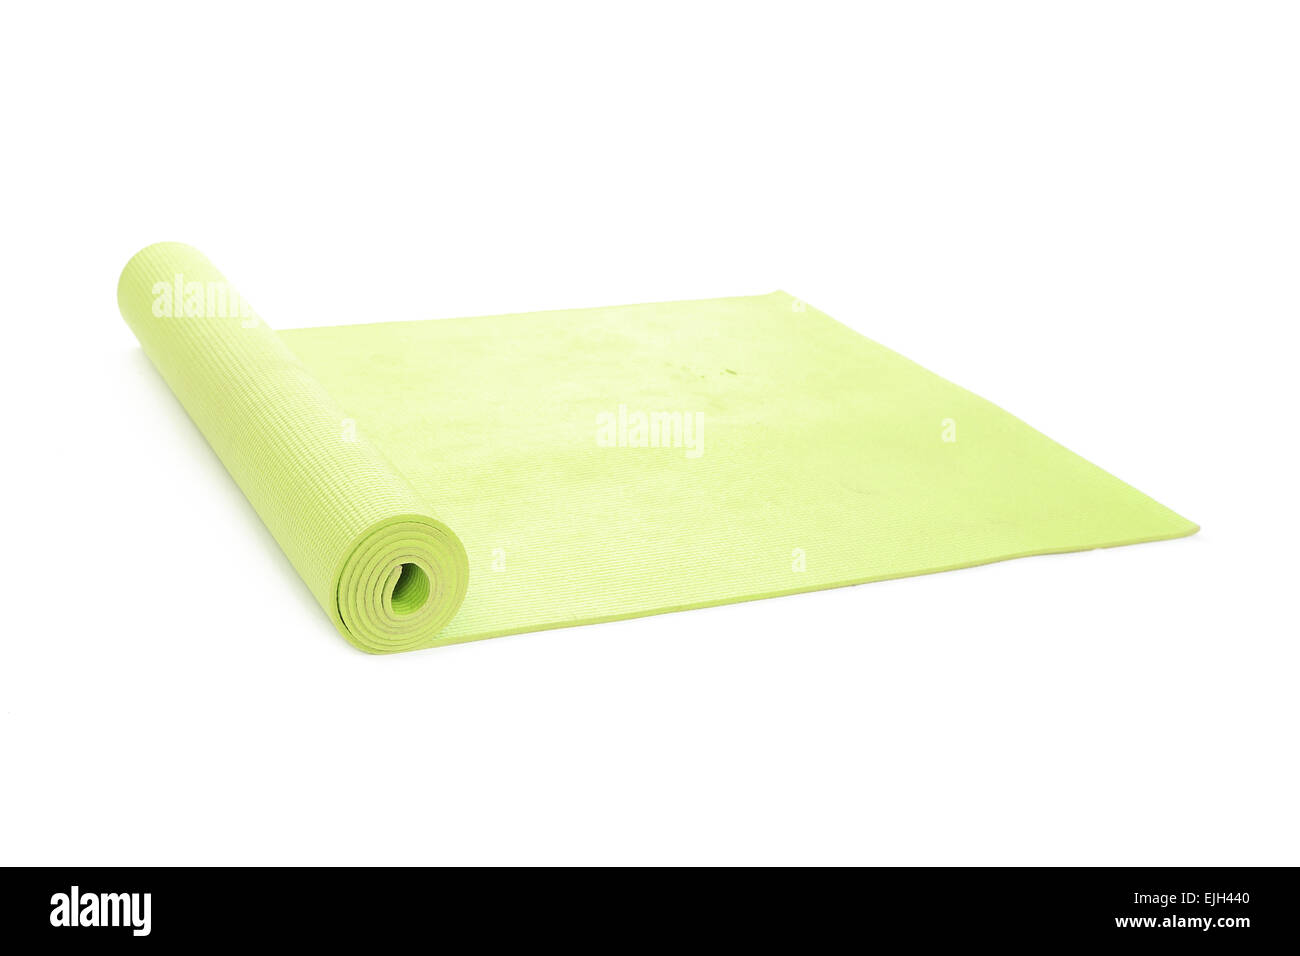 green yoga mat on a white background Stock Photo